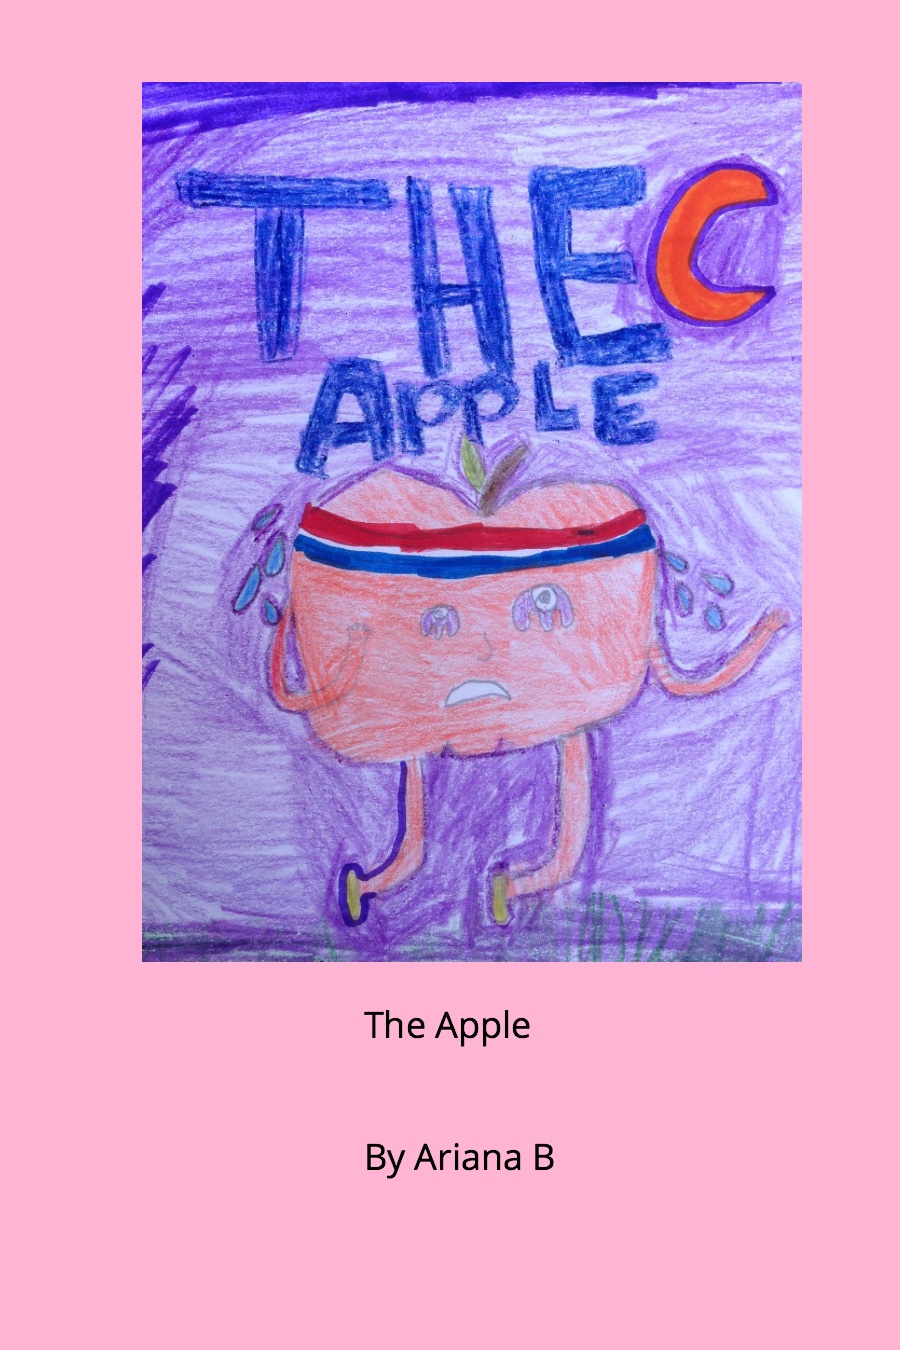 The Apple by Ariana B